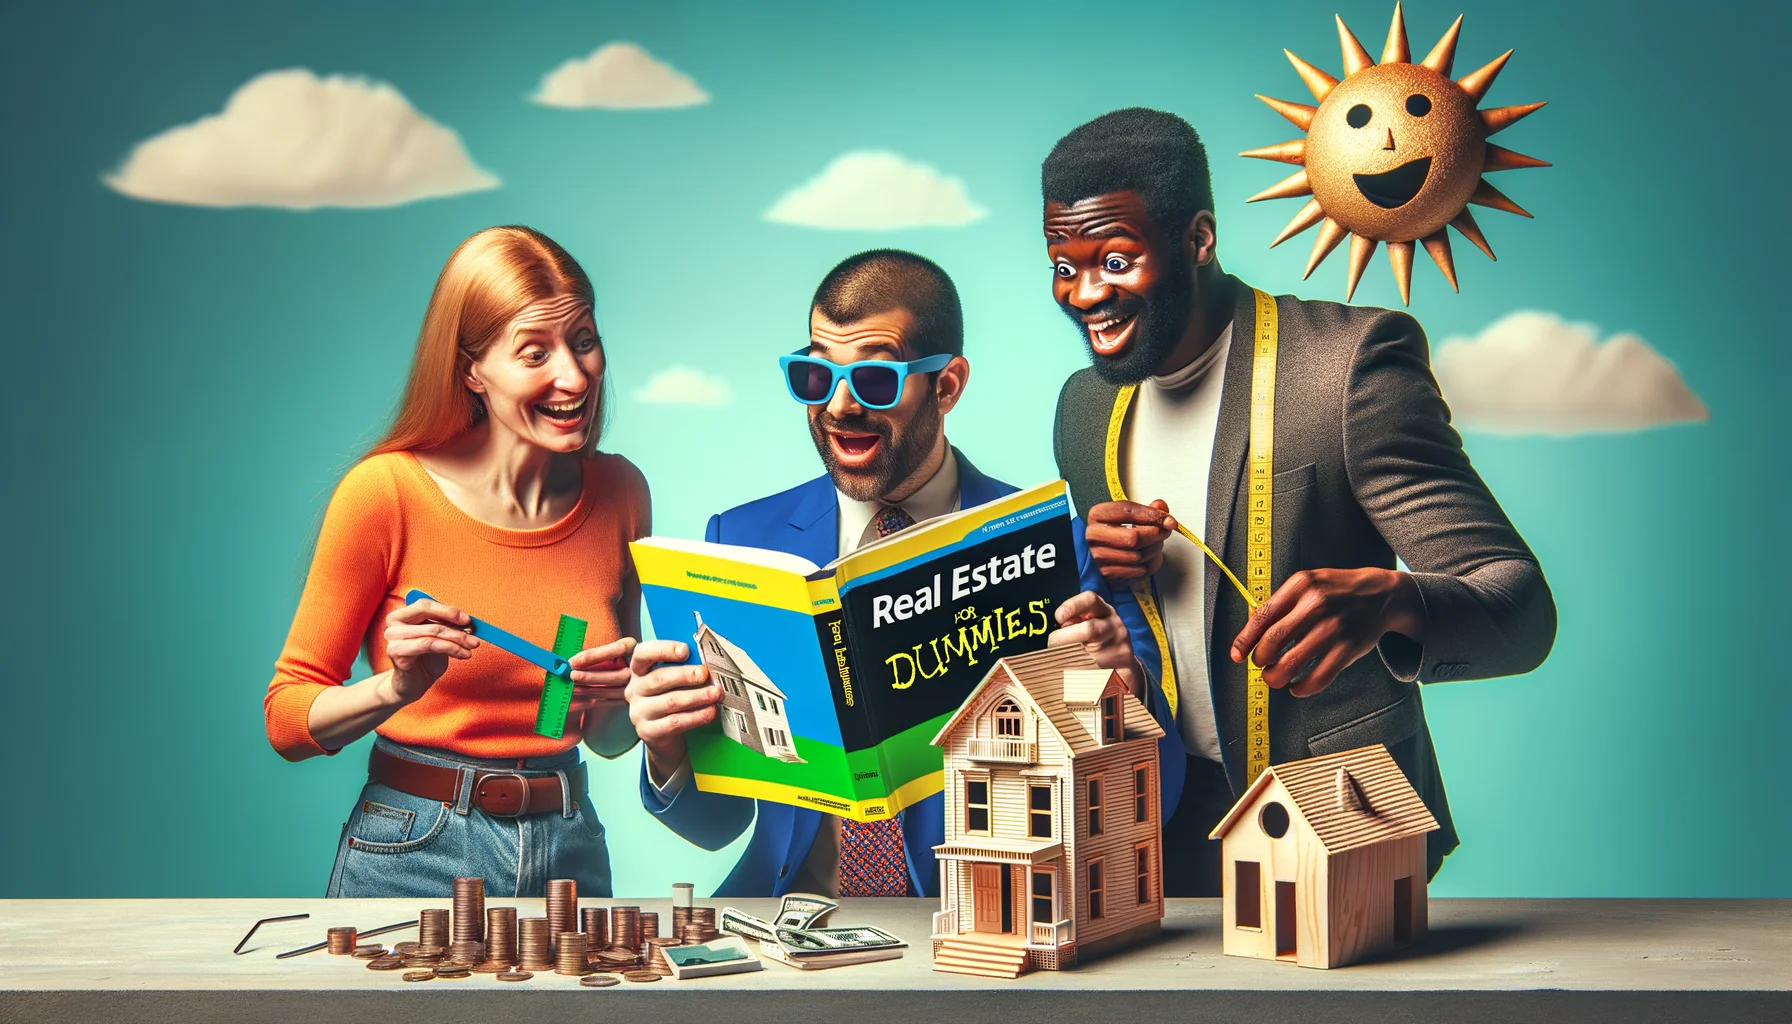 Create a humorous and realistic image representing the scenario of investing in real estate for beginners. Use a light-hearted tone. The scene includes three individuals of varied descent: a Caucasian woman, a Hispanic man, and a Black man. The former two are enthusiastically studying a colorful 'Real Estate for Dummies' book, while the latter is comically attempting to erect a shoddily made mini house. Include amusing details like a ruler inaccurately measuring the house, coins falling out of the man's pocket suggesting their investment, and a very happy sun wearing sunglasses in the clear sky.